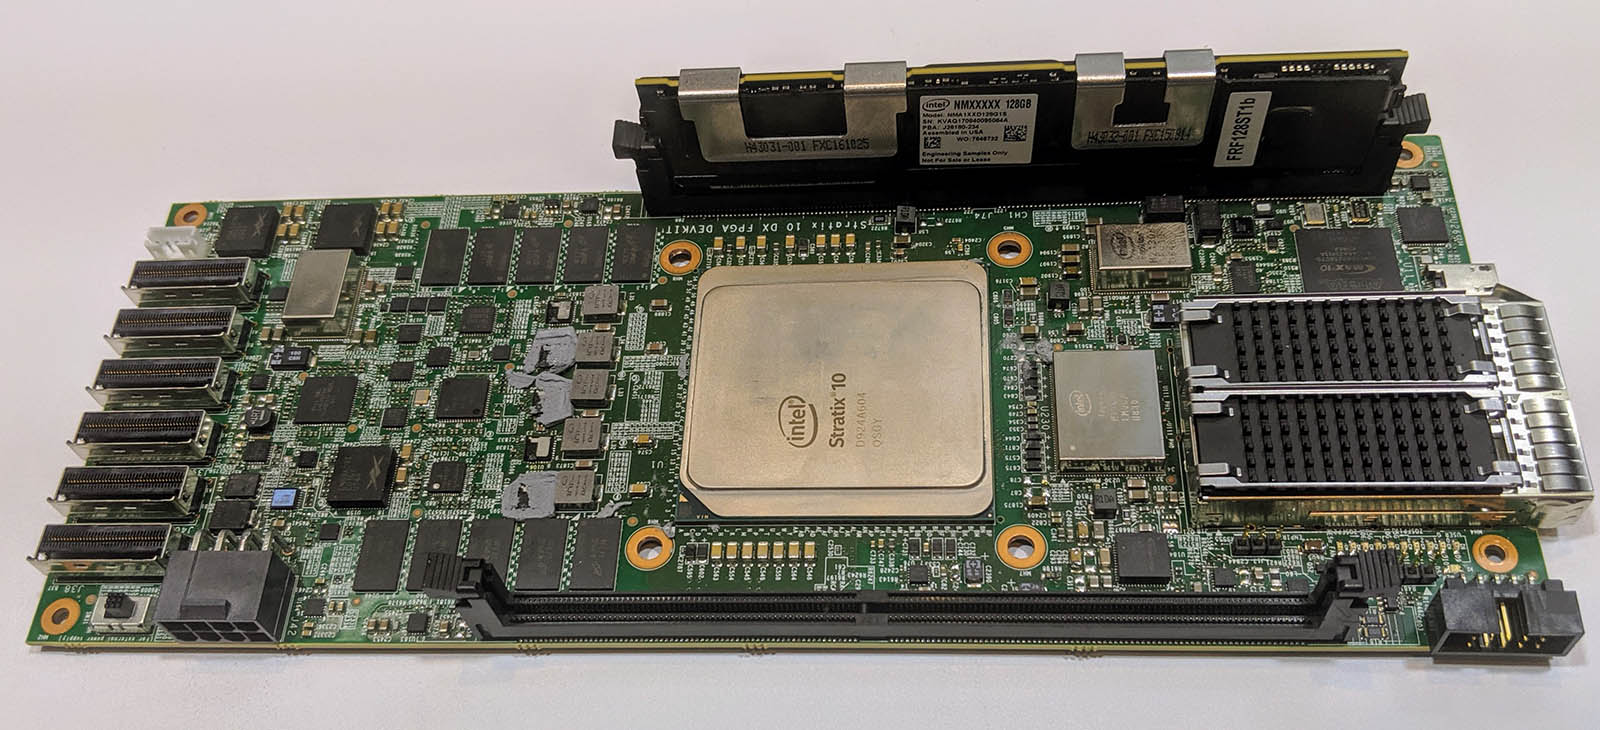 Intel Stratix 10 With DCPMM And UPI Dev Board Pictured Close